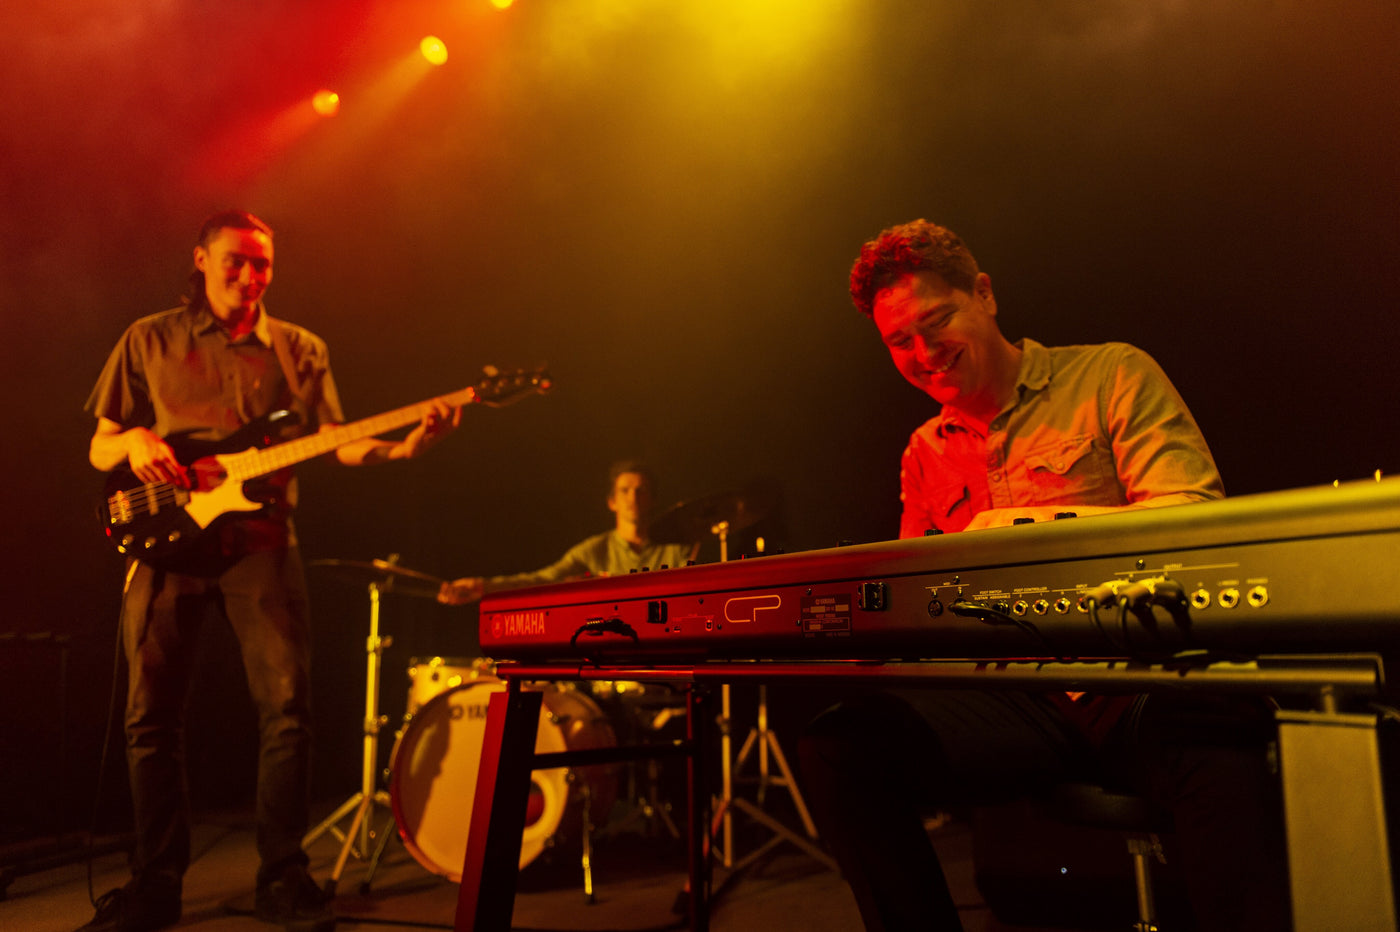 Electronic stage piano being played by a musician on stage with warm lighting, with other band members in the background including a bass guitarist and a drummer.